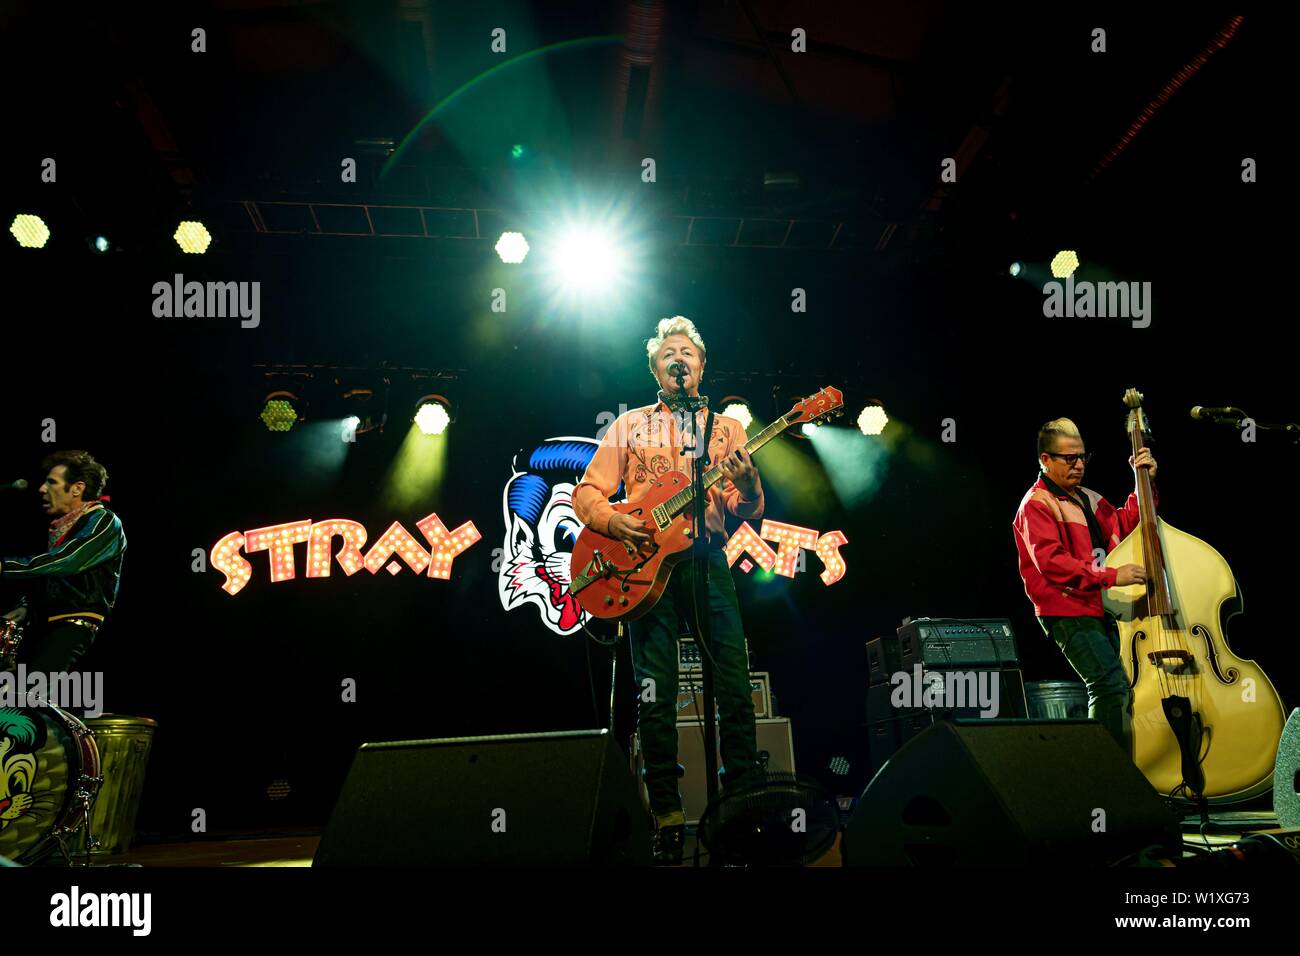 03.07.2019, the American rockabilly band Stray Cats live on stage on their 40th anniversary tour in the Columbiahalle in Berlin. The band performs in the original line-up of 1979 with Brain Setzer (guitar & vocals), Lee Rocker (double bass) and Slim Jim Phantom (drums). | usage worldwide Stock Photo